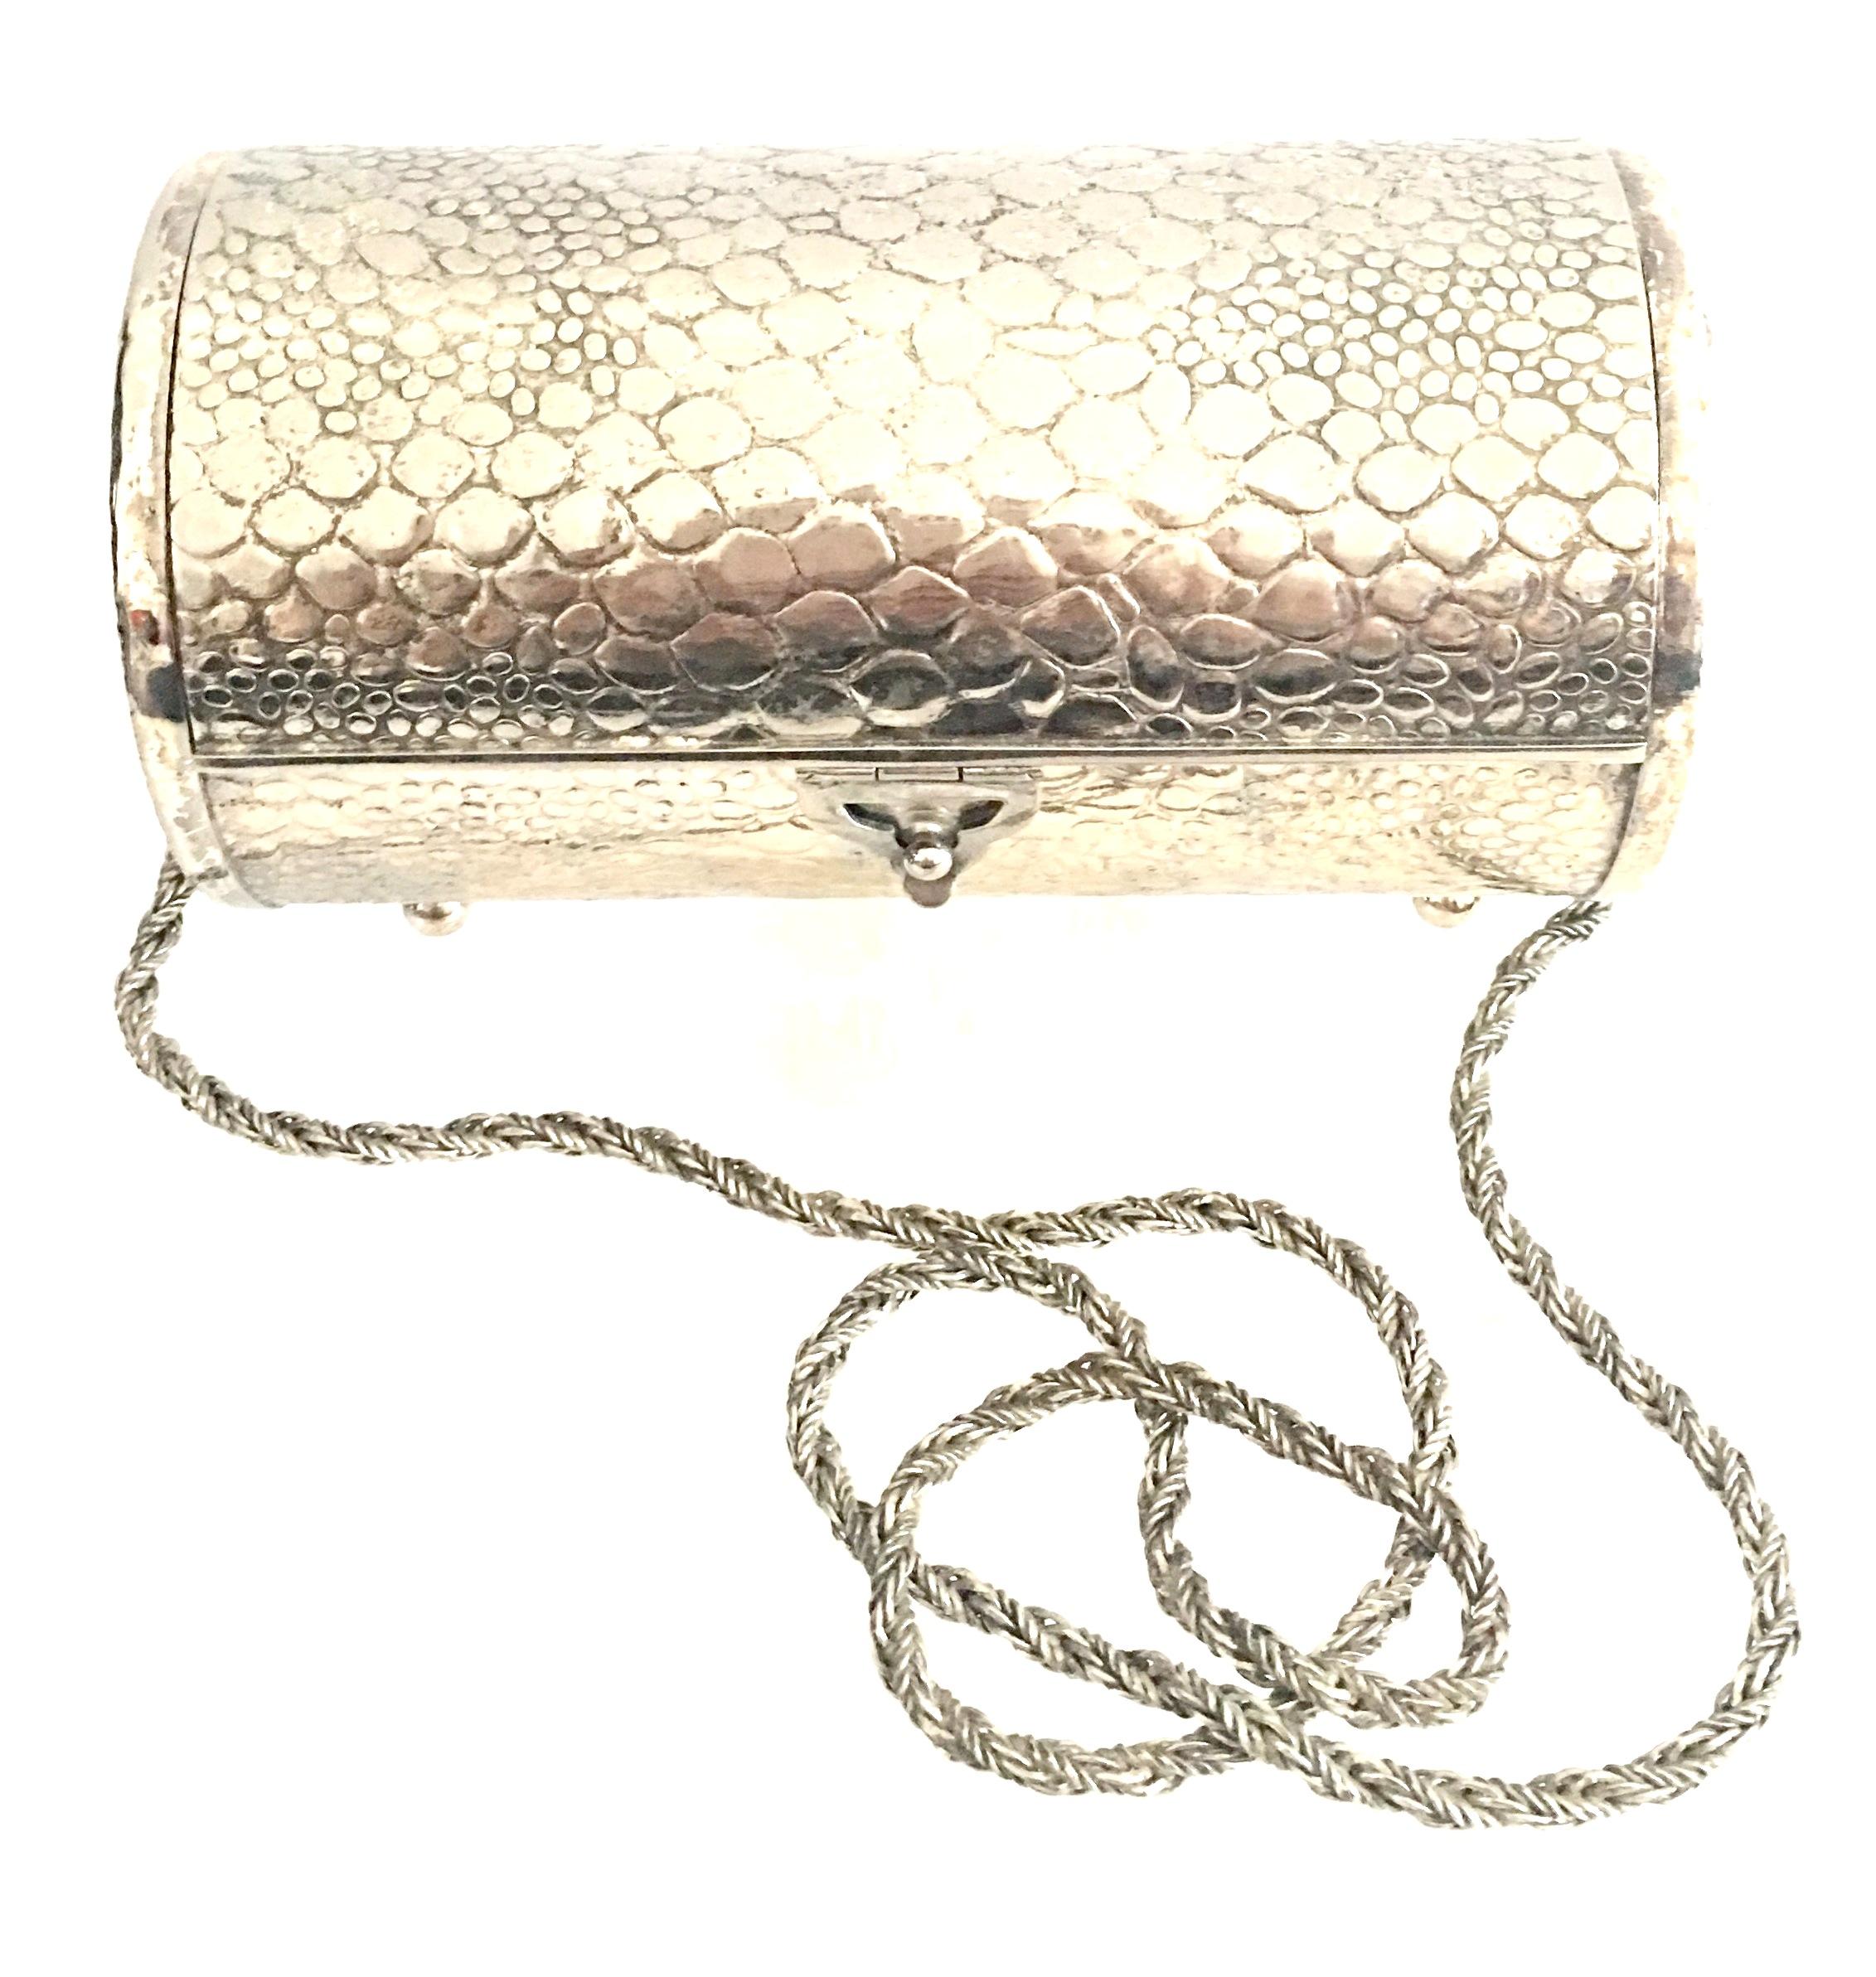 1980'S Silver plate tootsie roll shaped hard case box style clutch and shoulder evening bag made in Italy for, Morris Moscowitz. Crocodile embossed detail. Blue velvet lining with original manufacture tag in tact. Silver chain shoulder strap with a